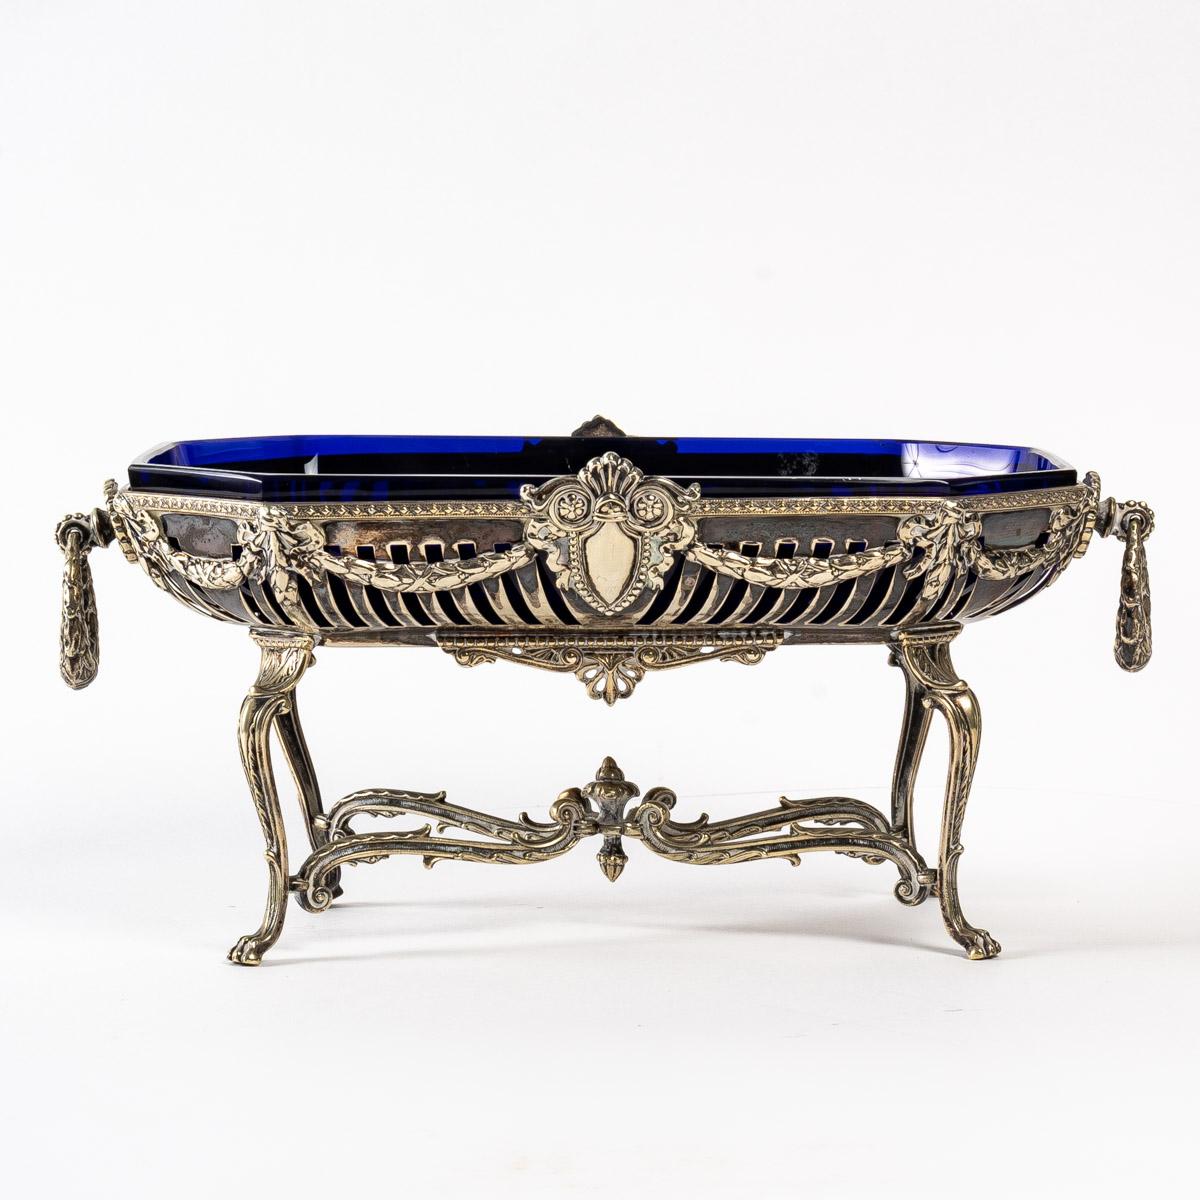 Bohemian Crystal and Silver Plated Metal Bowl, 19th Century For Sale 3